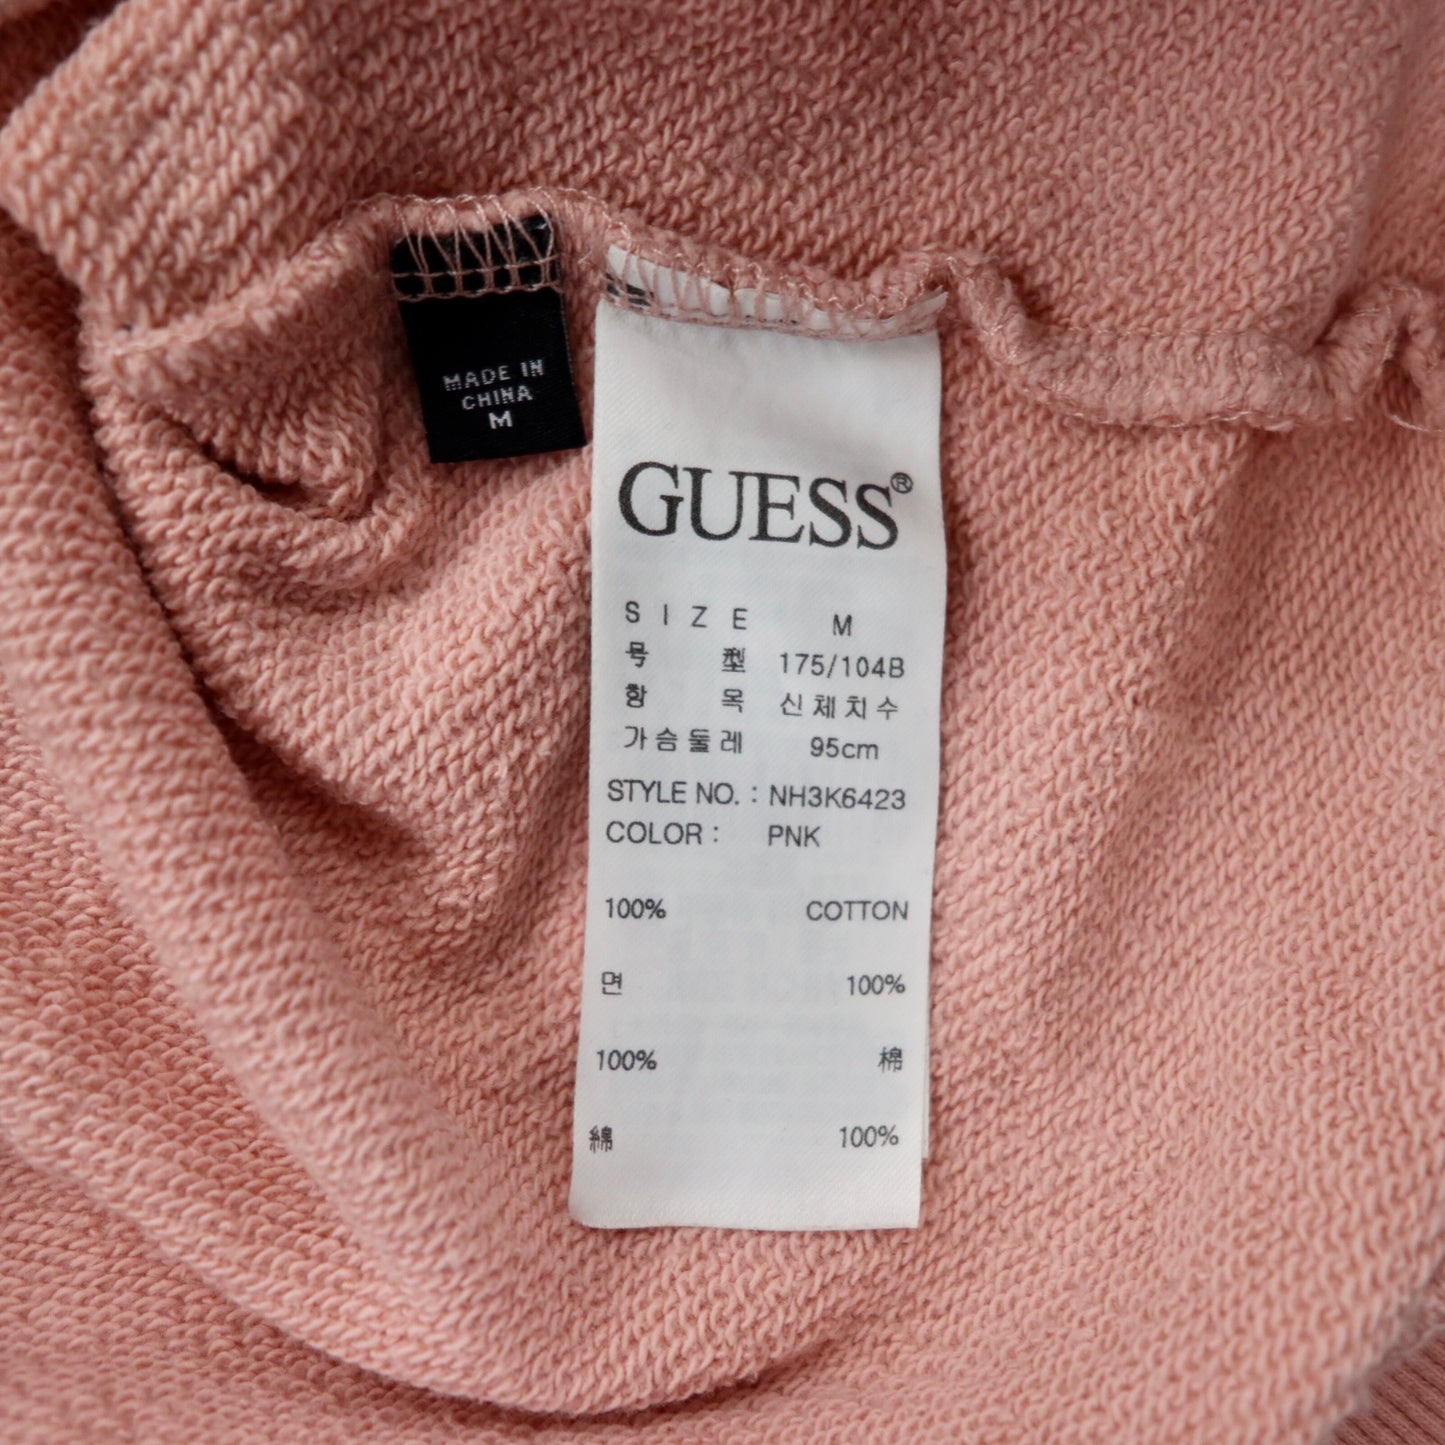 GUESS JEANS U.S.A. エンボスロゴスウェット M ピンク